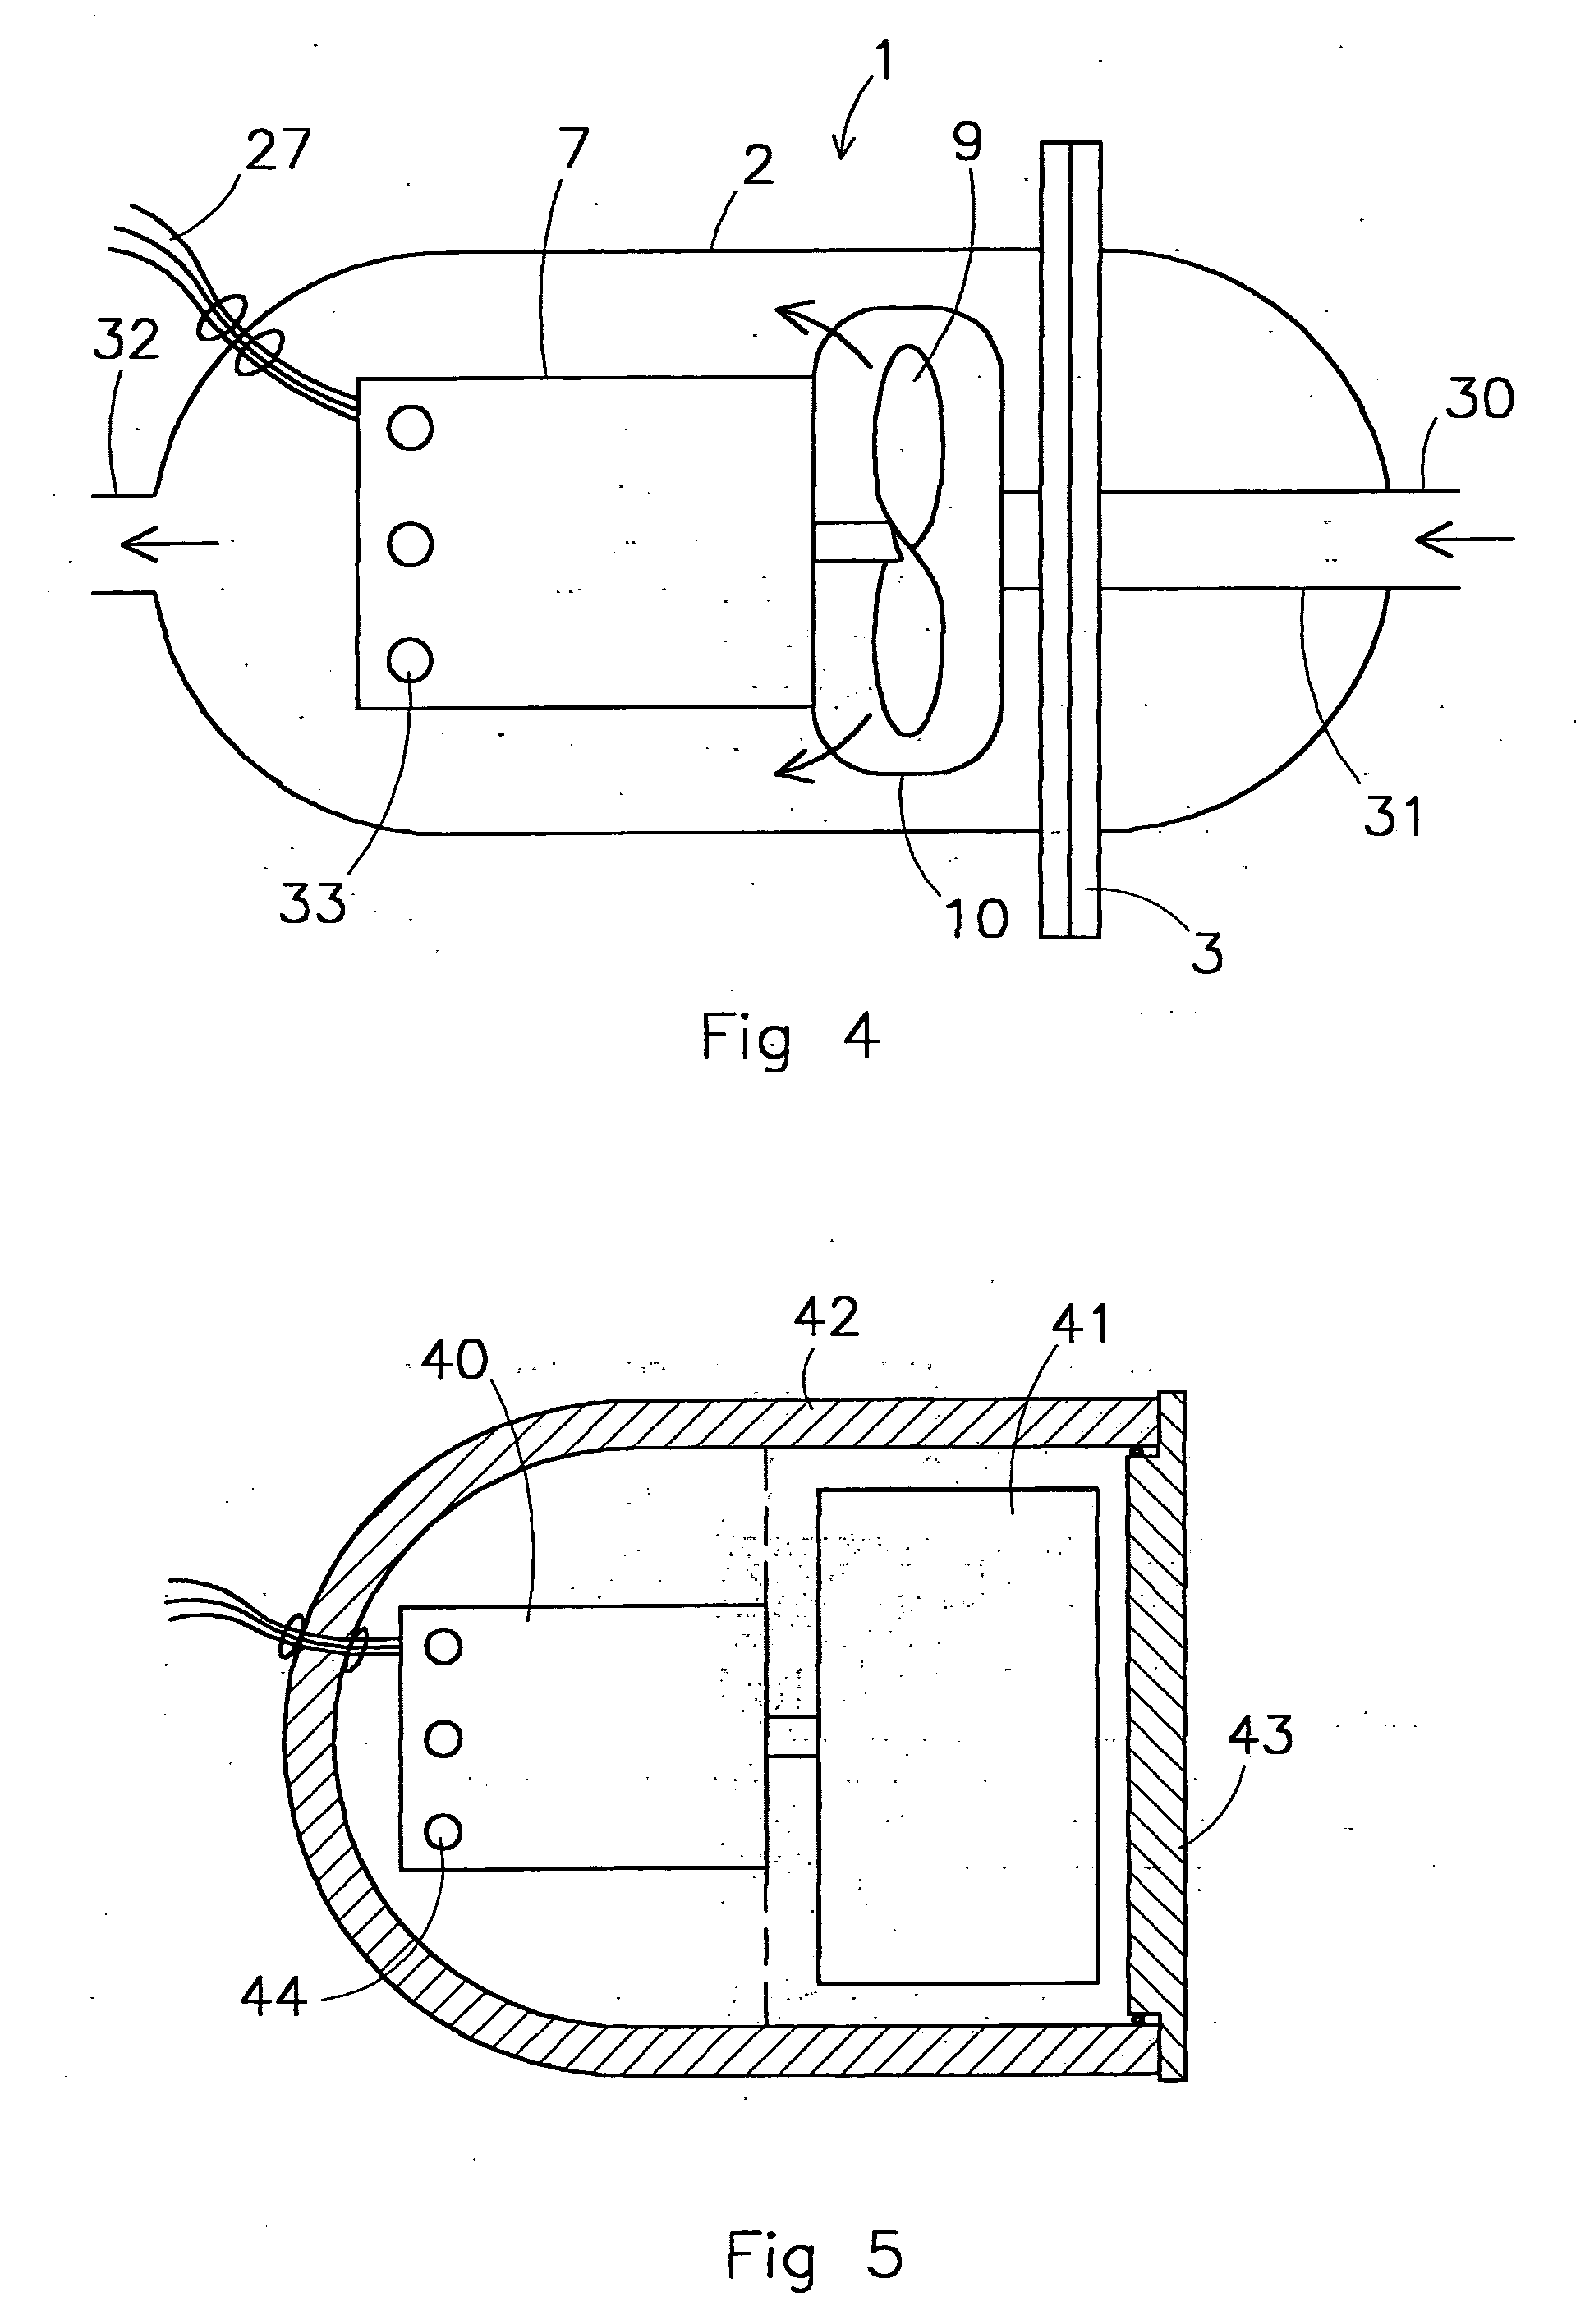 Device for treating pieces of a substrate at high pressure with a supercritical or near-critical treatment medium, piece by piece or in batches